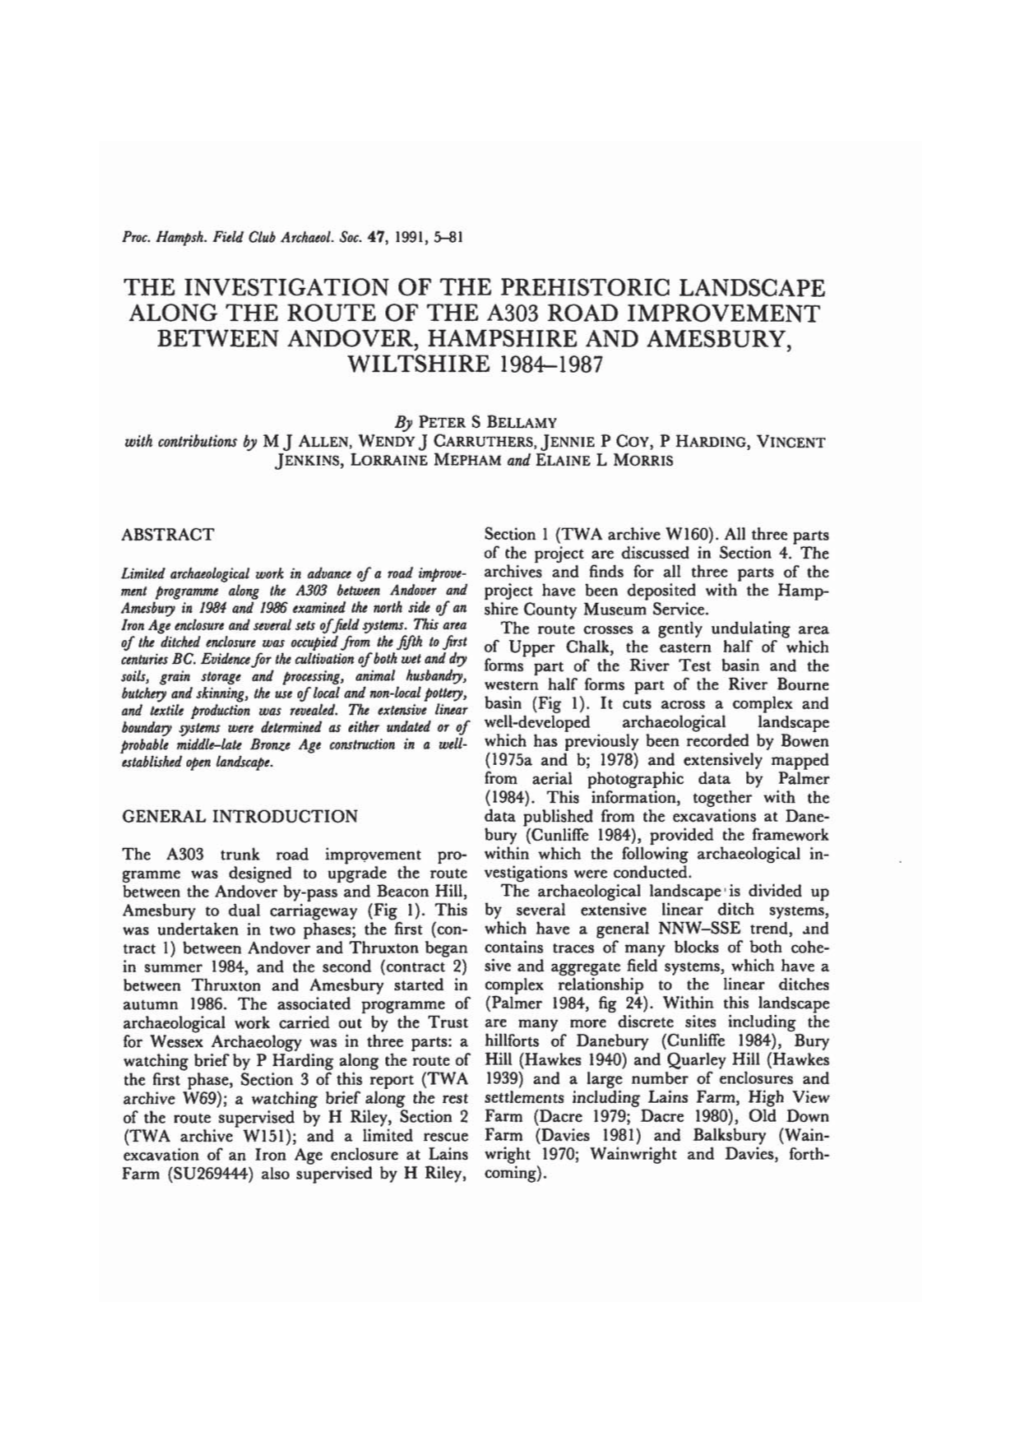 The Investigation of the Prehistoric Landscape Along the Route of the A303 Road Improvement Between Andover, Hampshire and Amesbury, Wiltshire 1984-1987